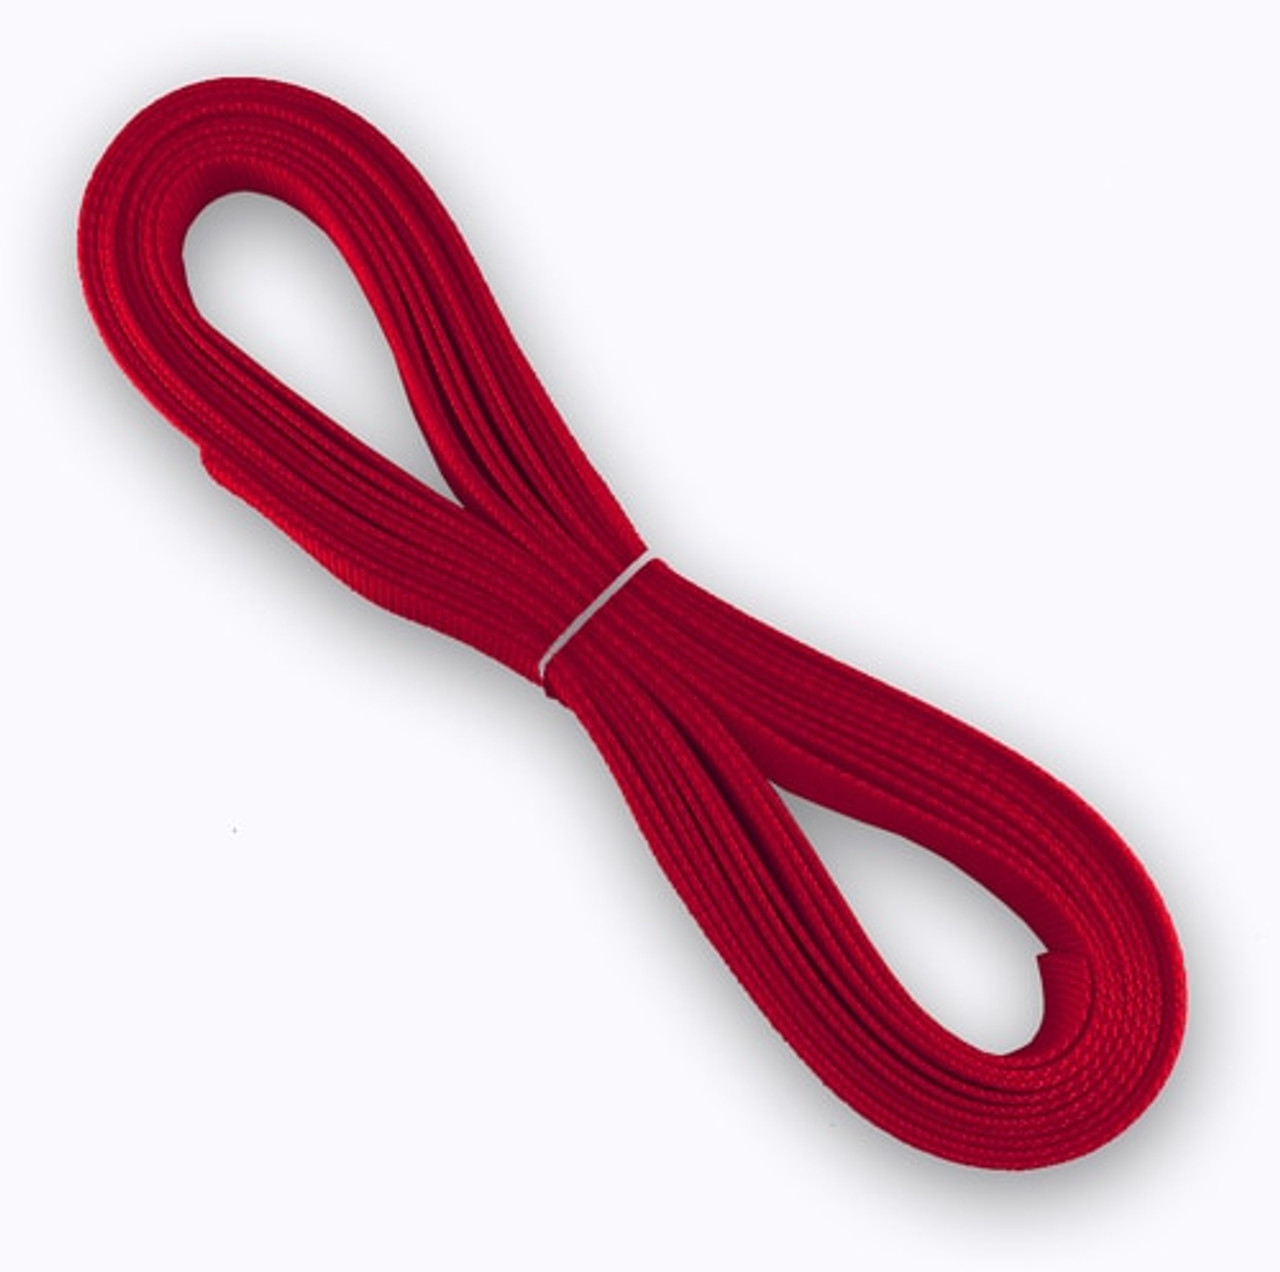 1 Inch Anchors Away on Red Nylon Webbing